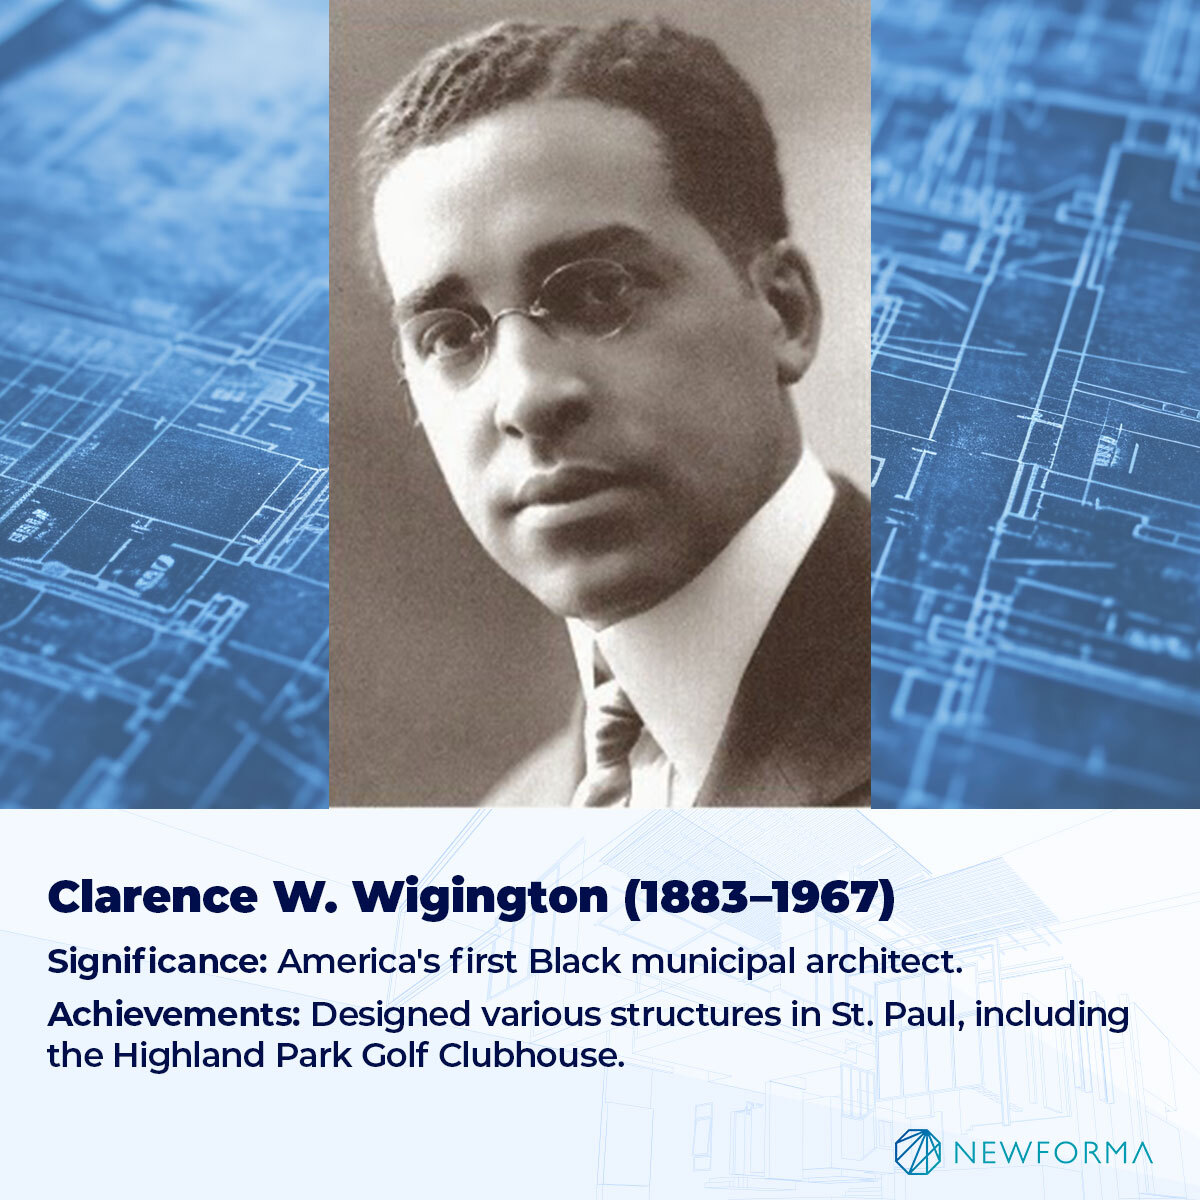 SIGNIFICANCE: AMERICA'S FIRST BLACK MUNICIPAL ARCHITECT. 
ACHIEVEMENTS: DESIGNED VARIOUS STRUCTURES IN ST. PAUL, INCLUDING THE HIGHLAND PARK GOLF CLUBHOUSE. 
